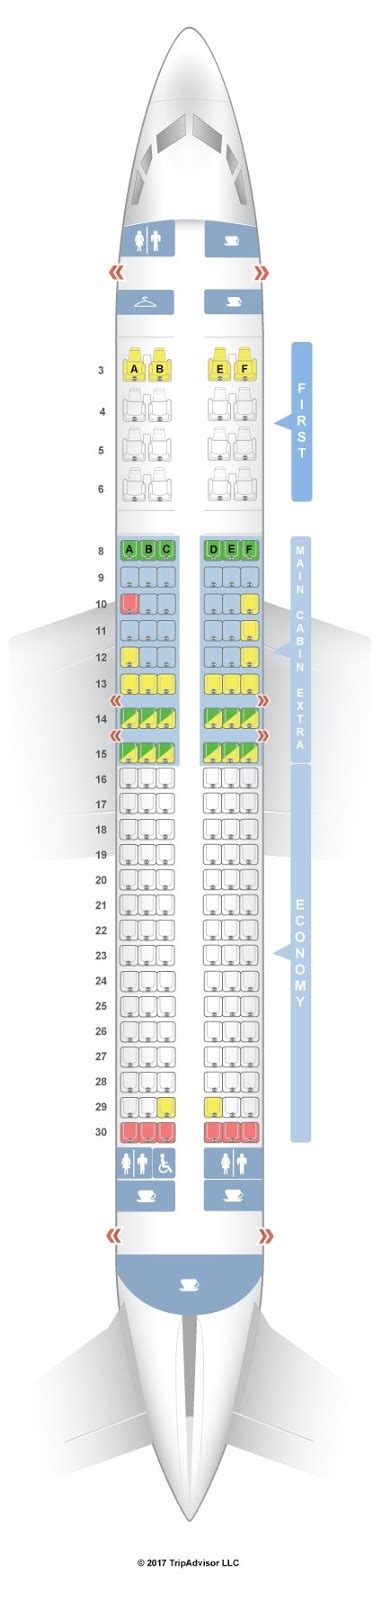 boeing 737 seating chart american